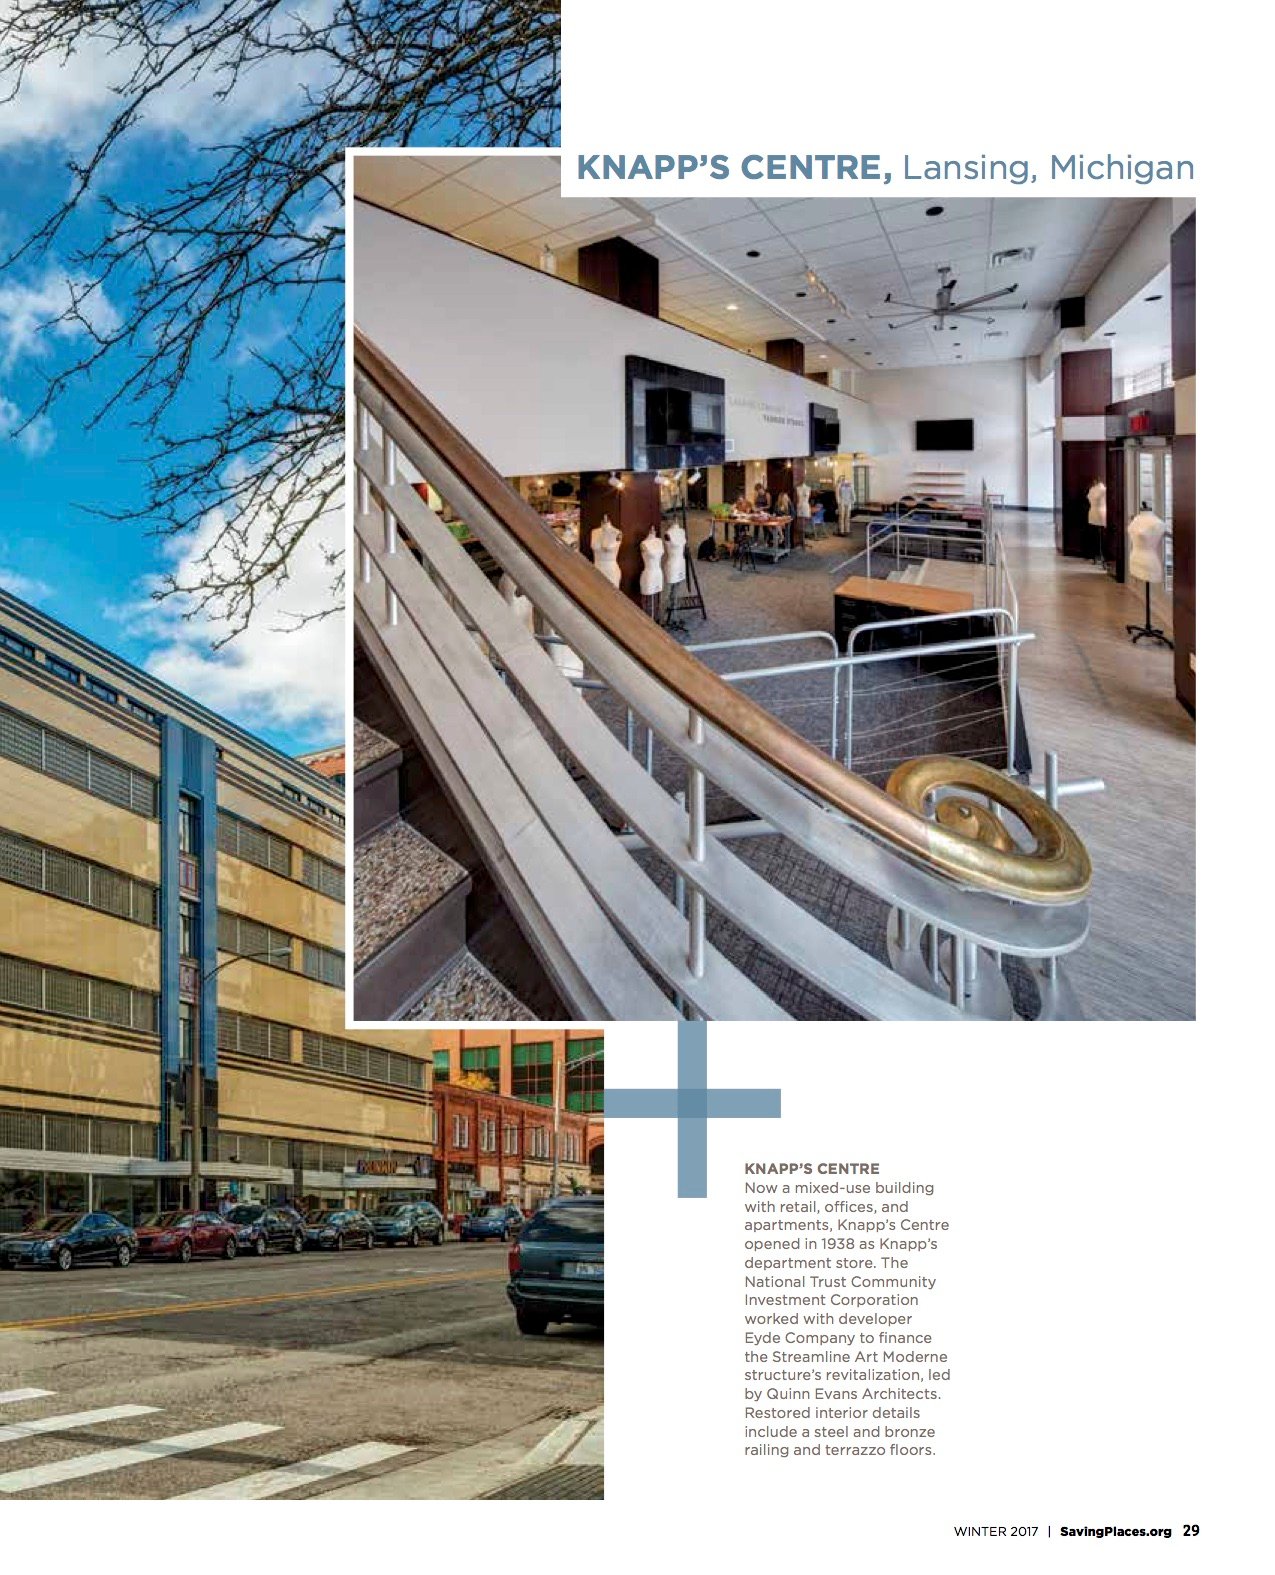 Tear sheet from Preservation Magazine showcasing the interior and exterior of the museum. Photo by Jason Keen.